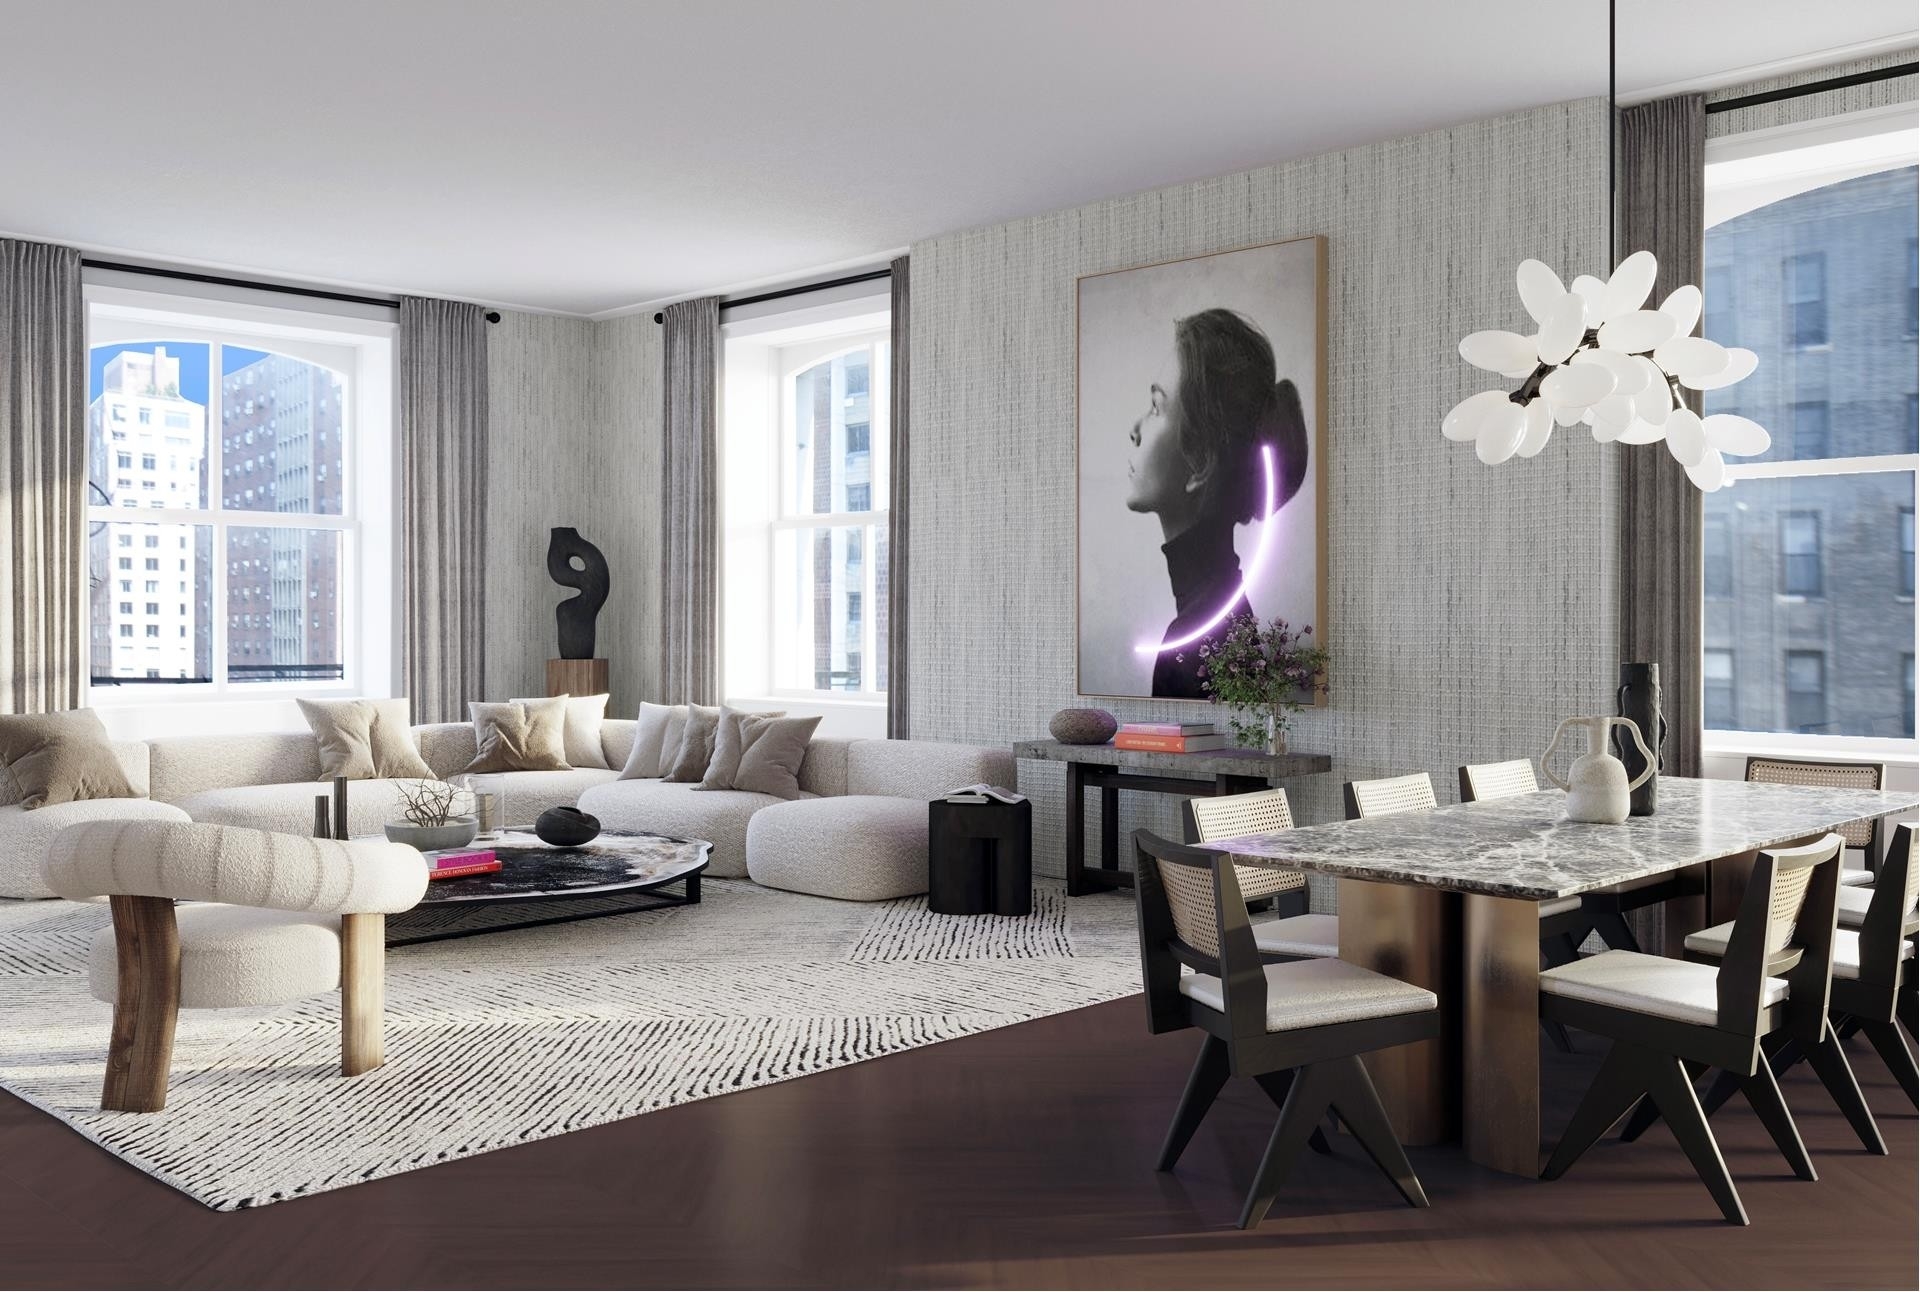 Condominium for Sale at The Belnord, 225 W 86TH ST , 1015 Upper West Side, New York, New York 10024